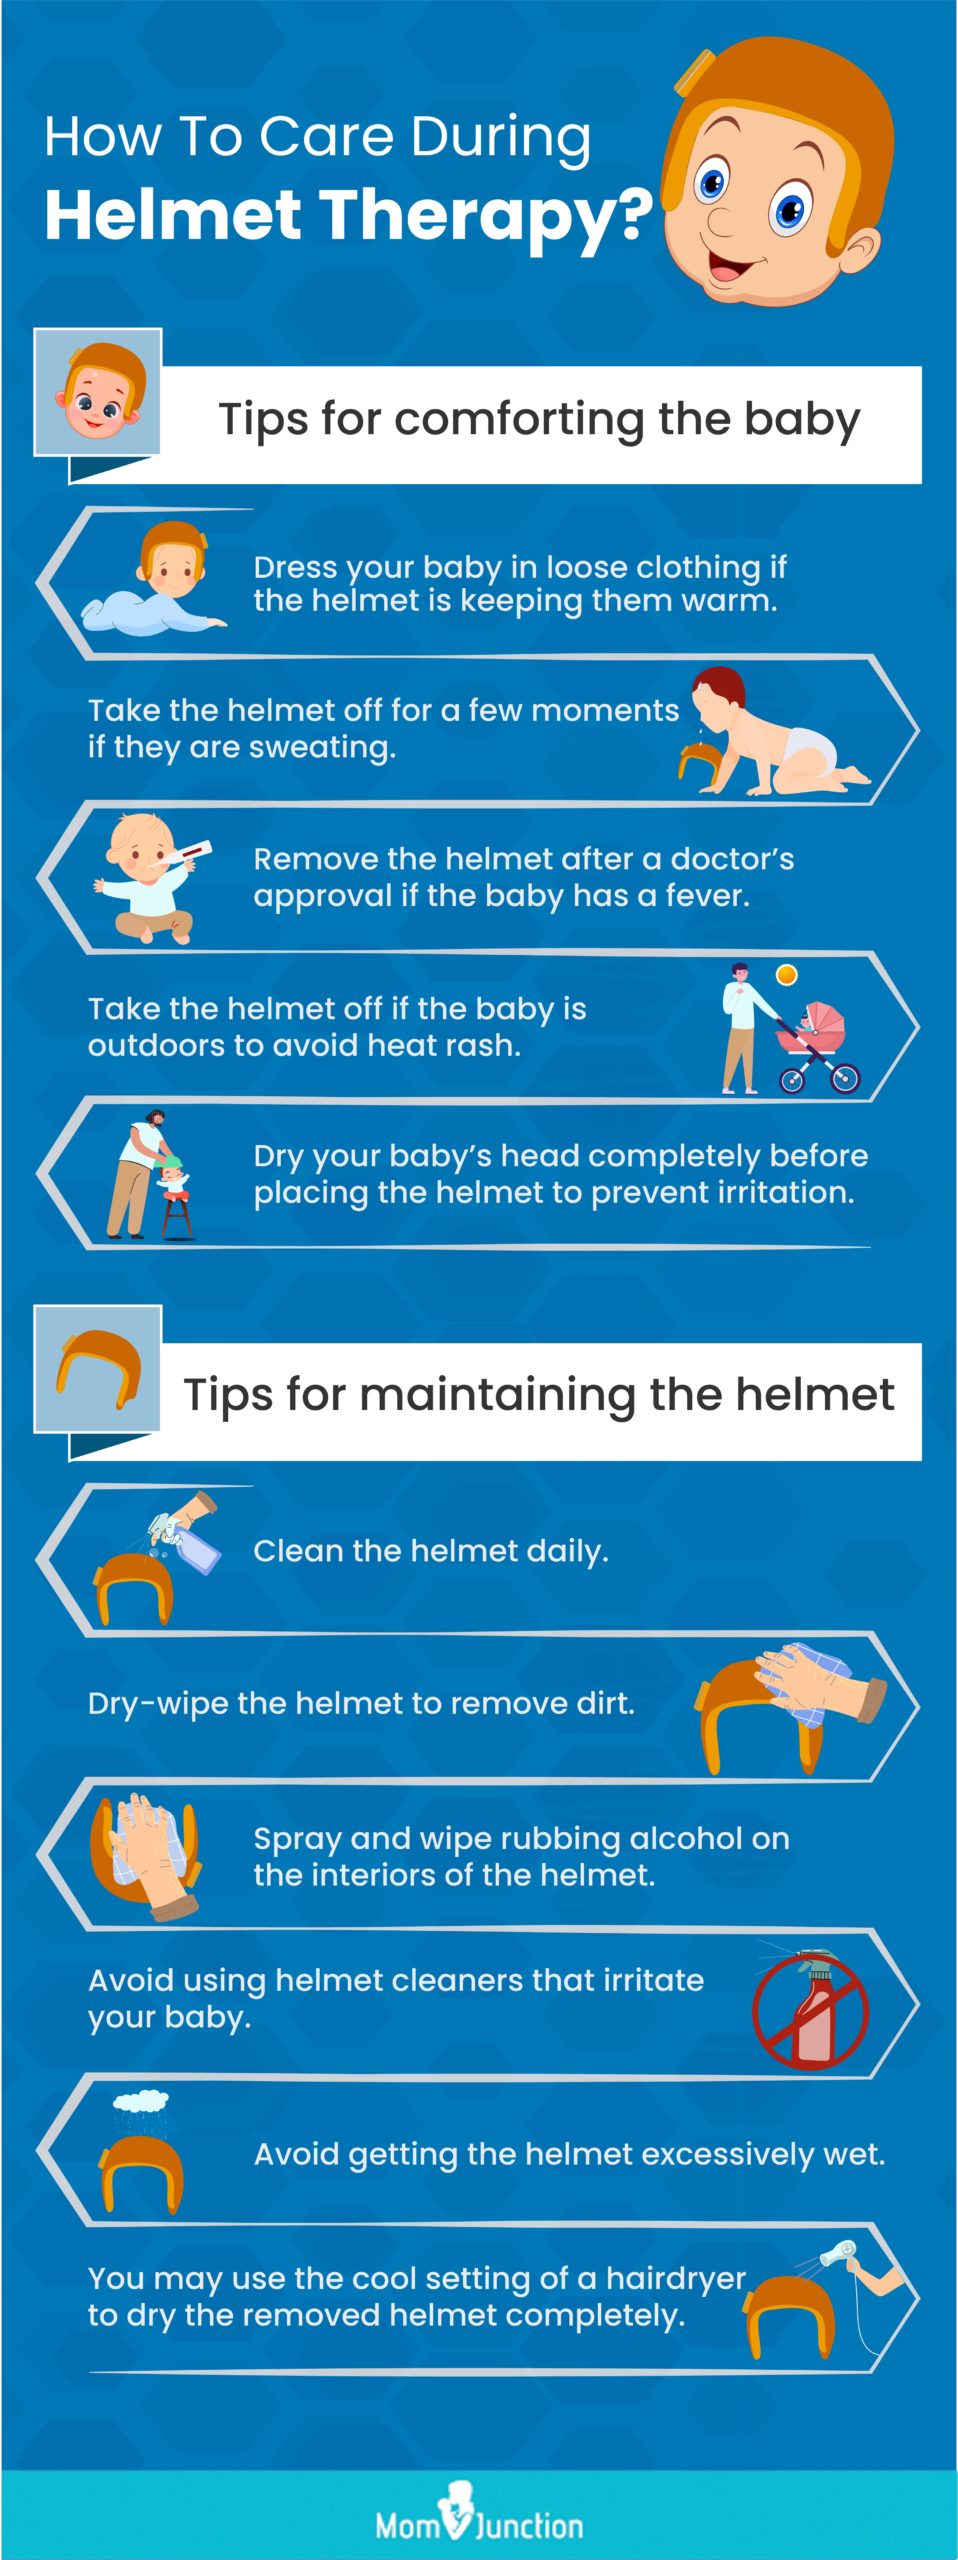 how to care during helmet therapy [infographic]